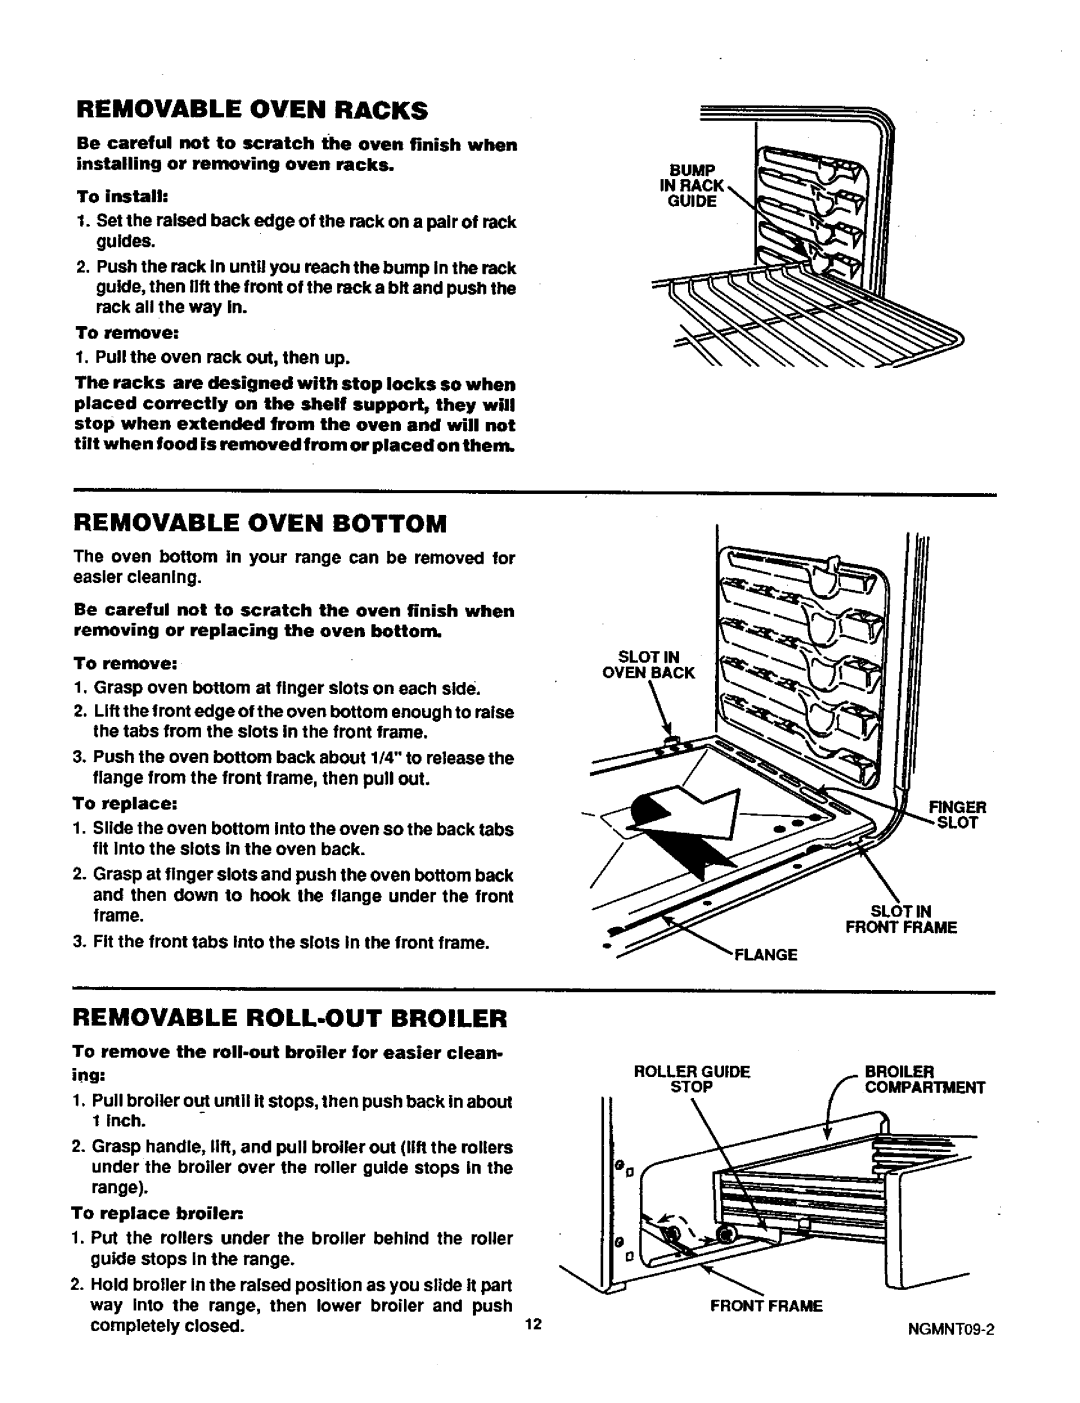 Sears 71381 warranty Removable Oven Racks, Removable Oven Bottom, Removable Roll-Outbroiler 